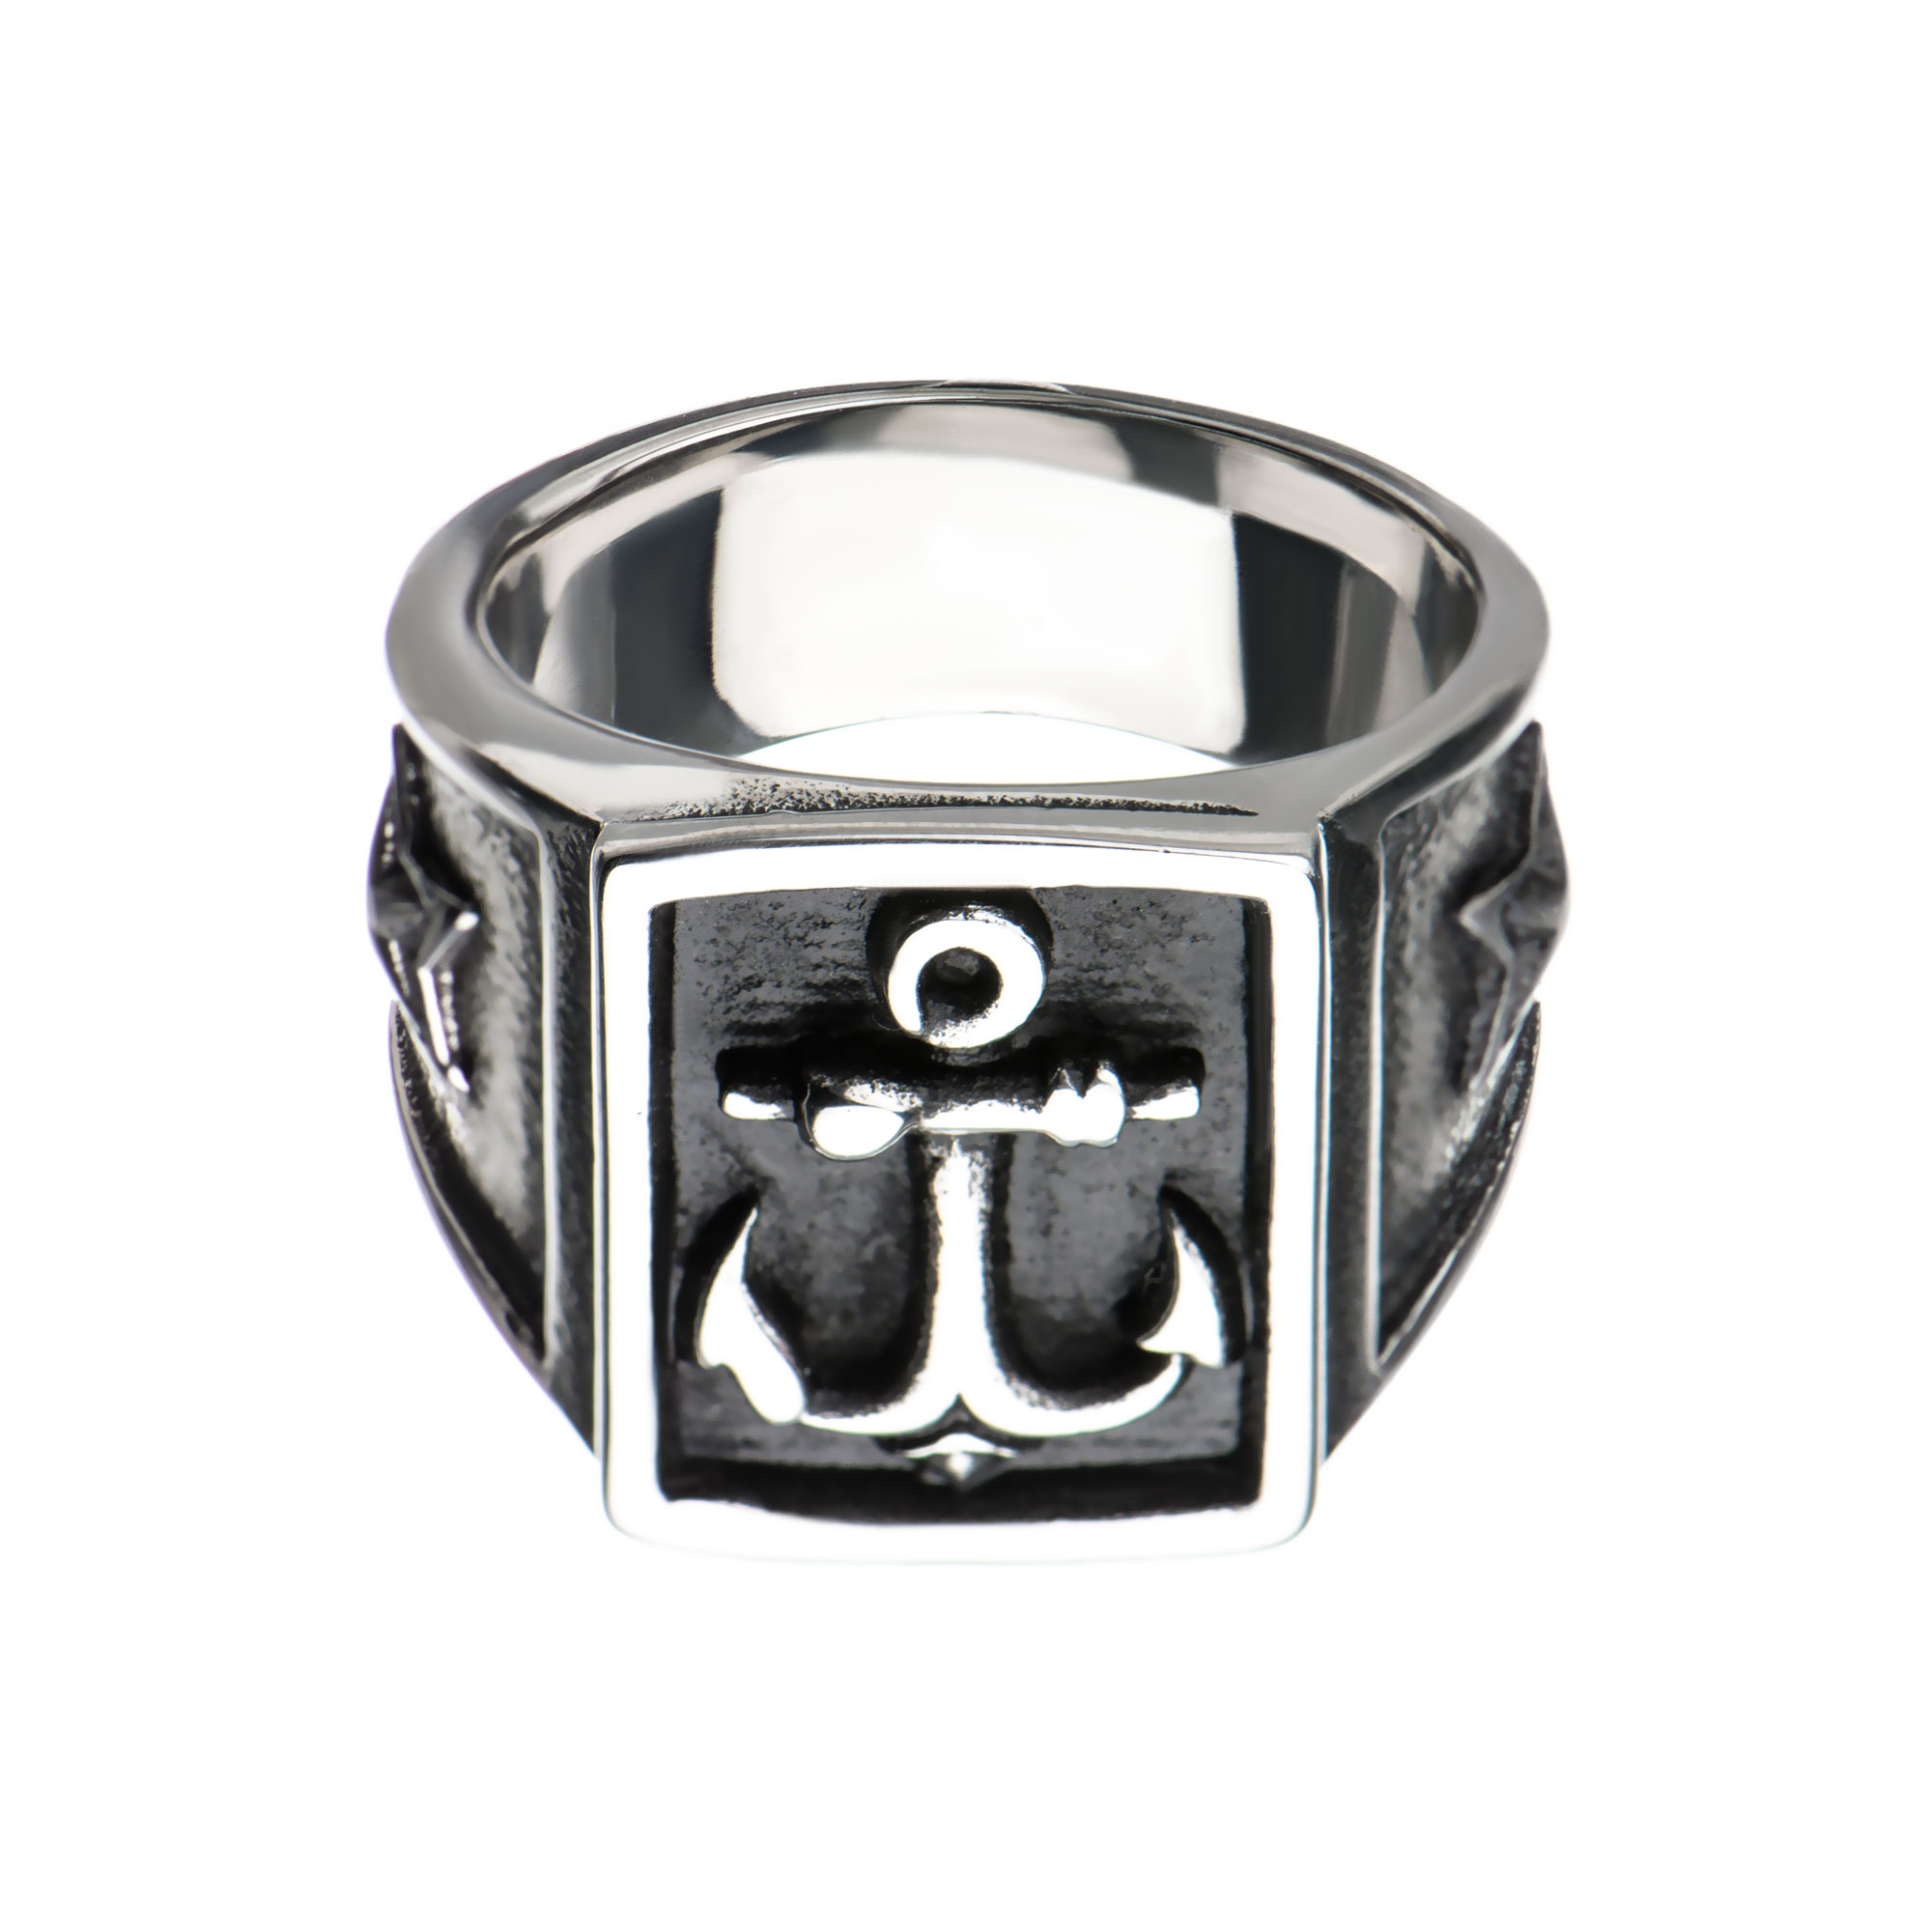 Steel & Black Plated Oxidized Anchor Signet Ring Image 2 Lewis Jewelers, Inc. Ansonia, CT